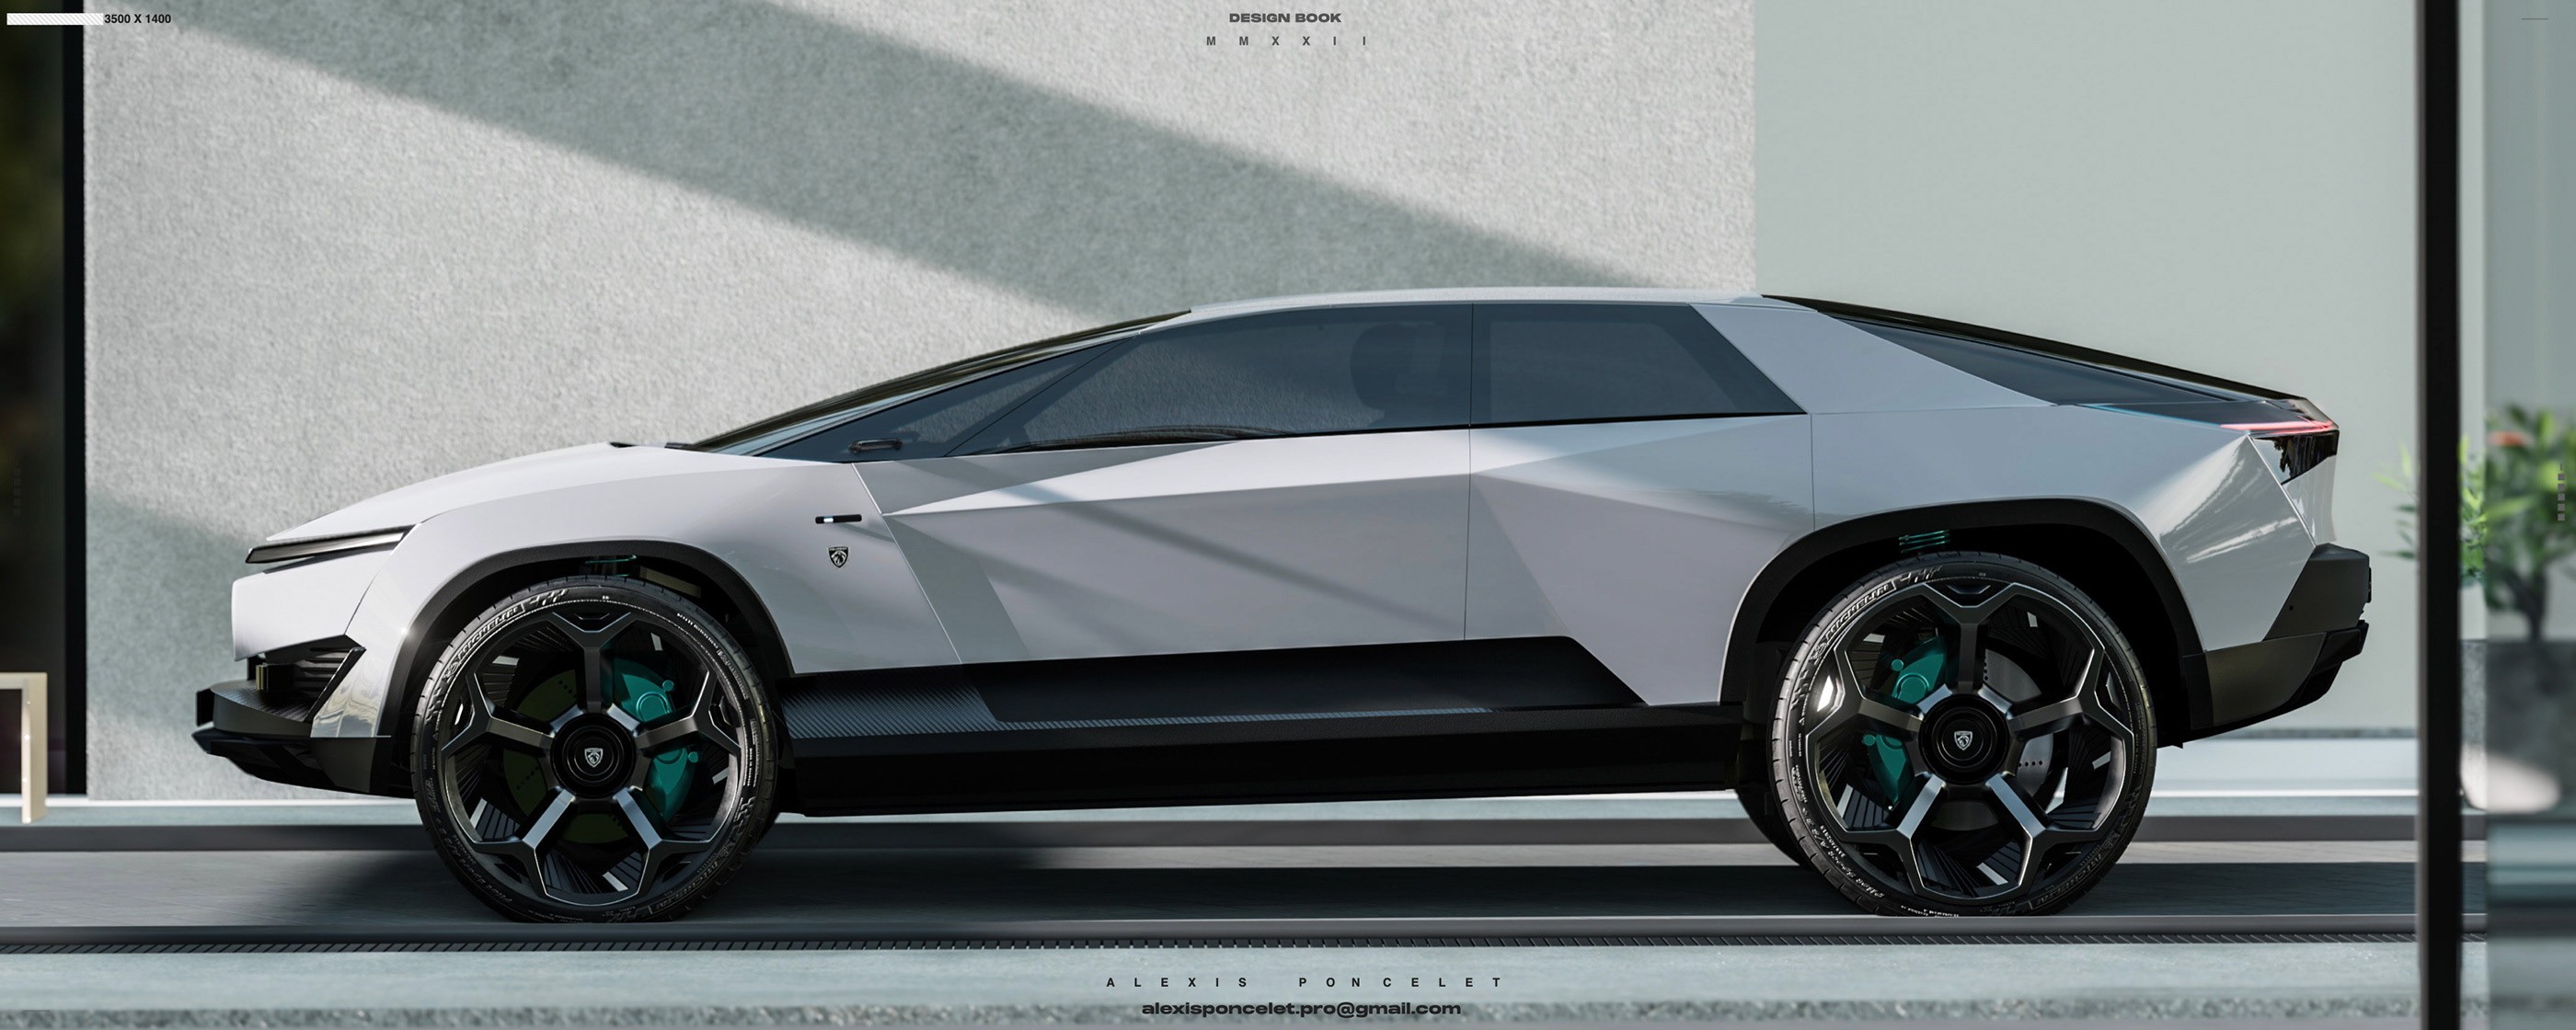 This Peugeot concept would have been the perfect French car